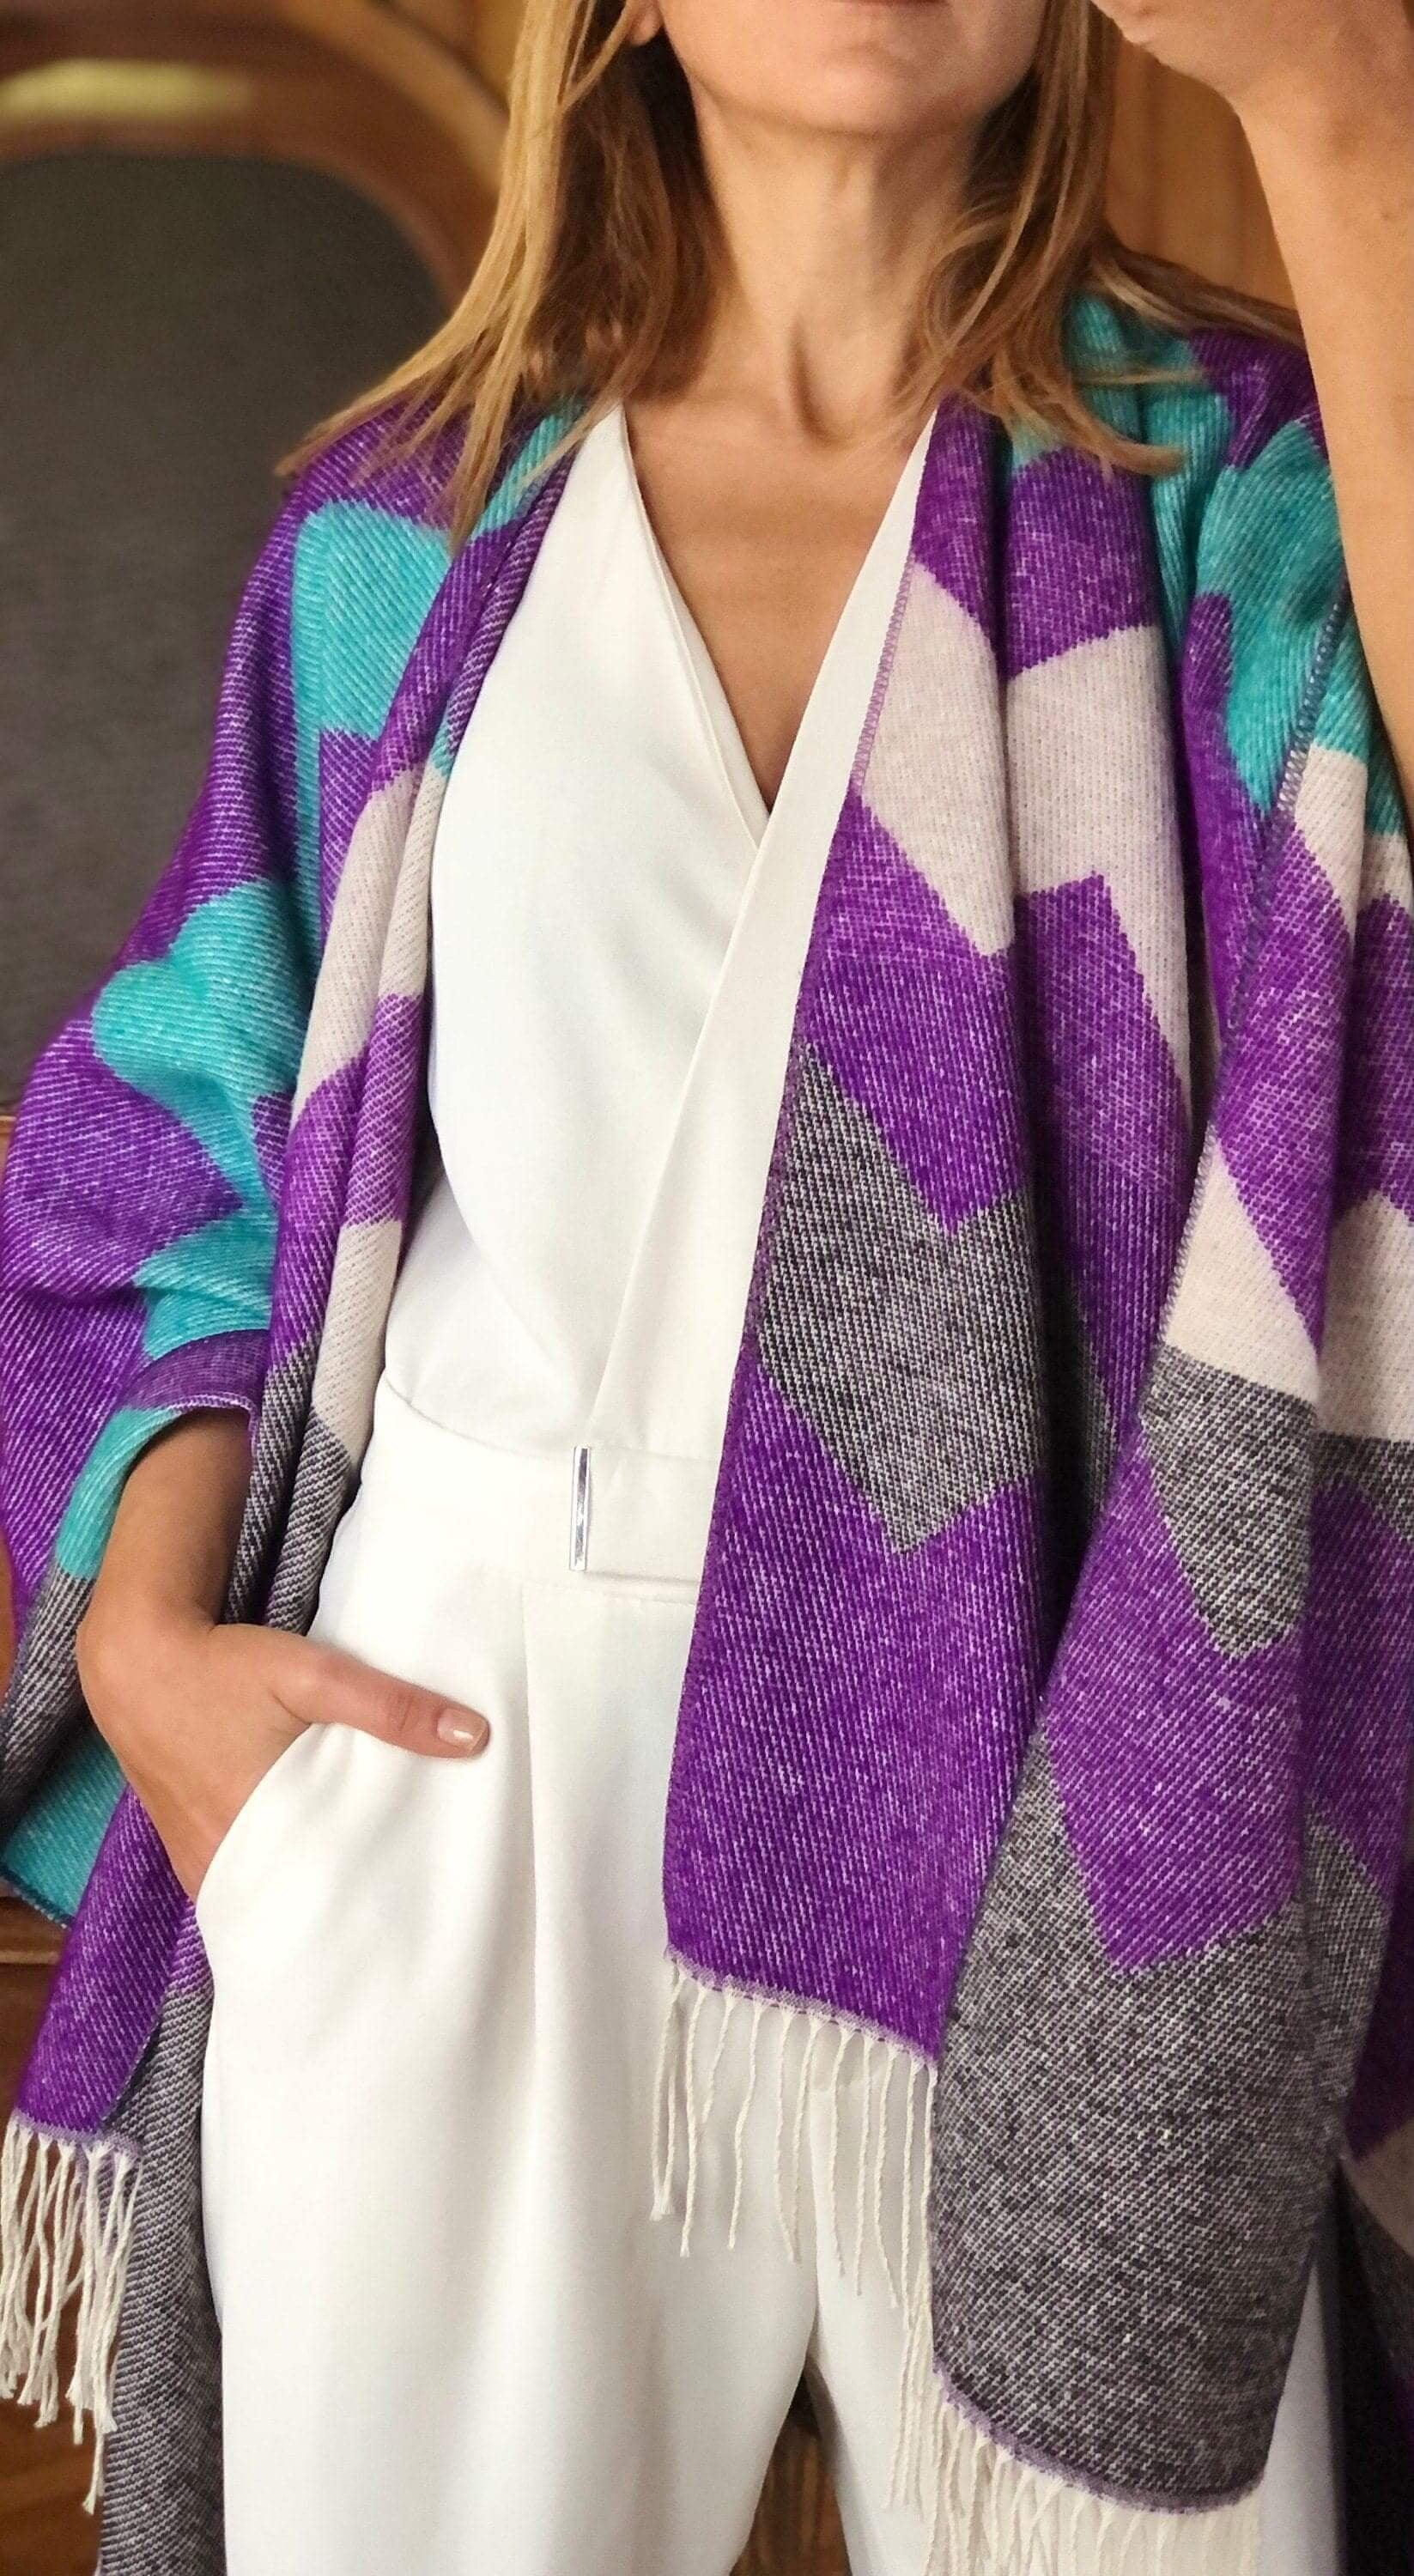 Luxurious Geometric Wool and Acrylic Poncho in Purple, Gray, White, Blue - Perfect for Fall and Winter, Large and Warm, Ideal Gift for Mom available at Moyoni Design